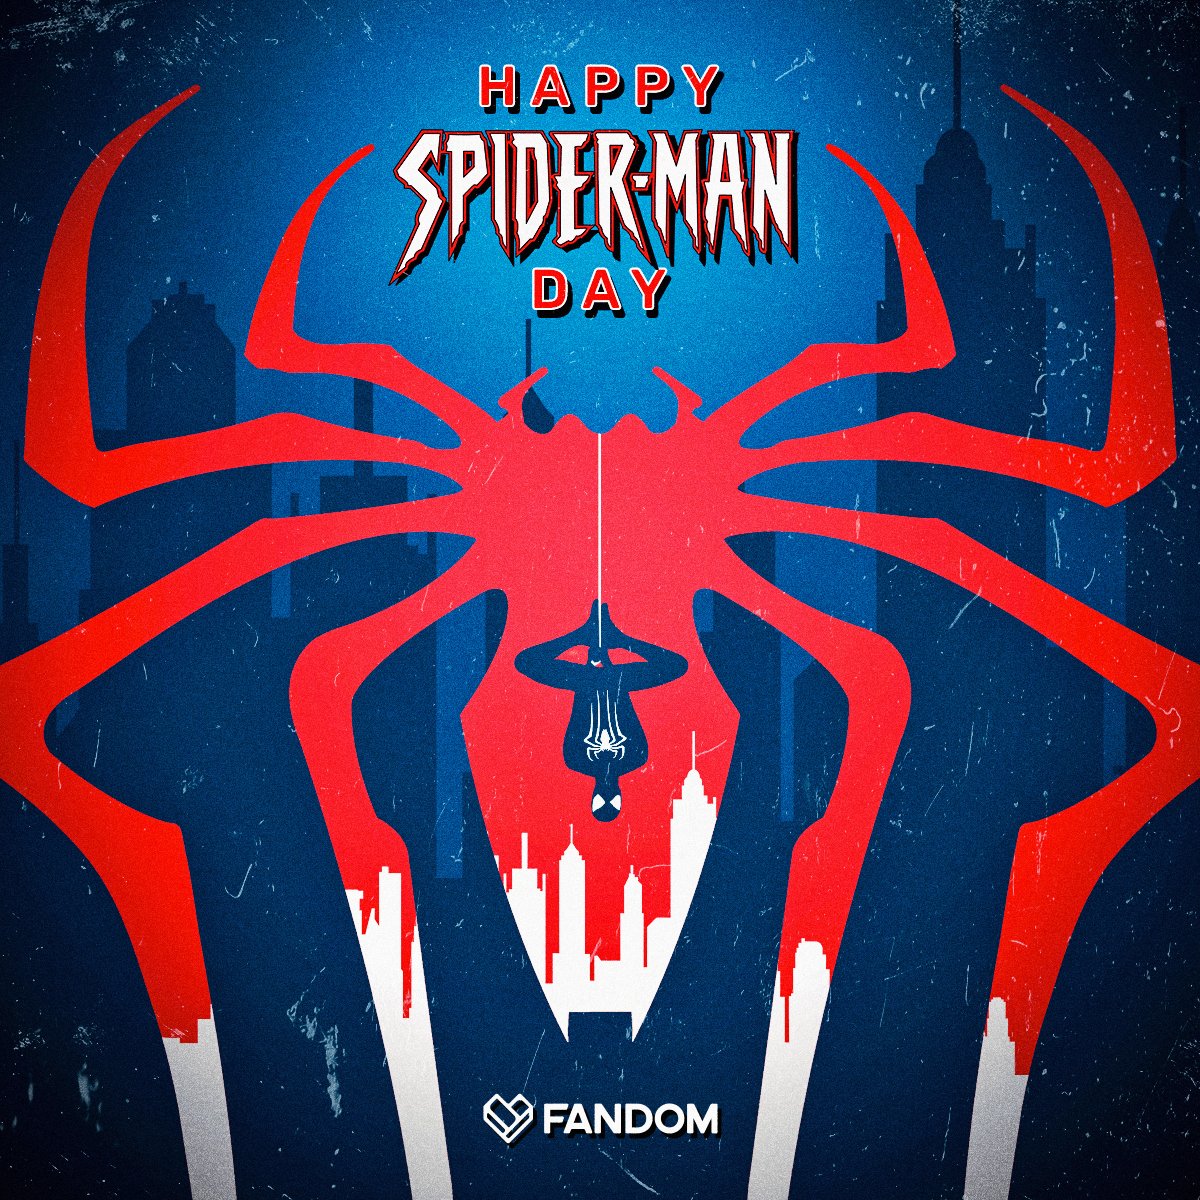 Today is National SpiderMan Day! Fandom